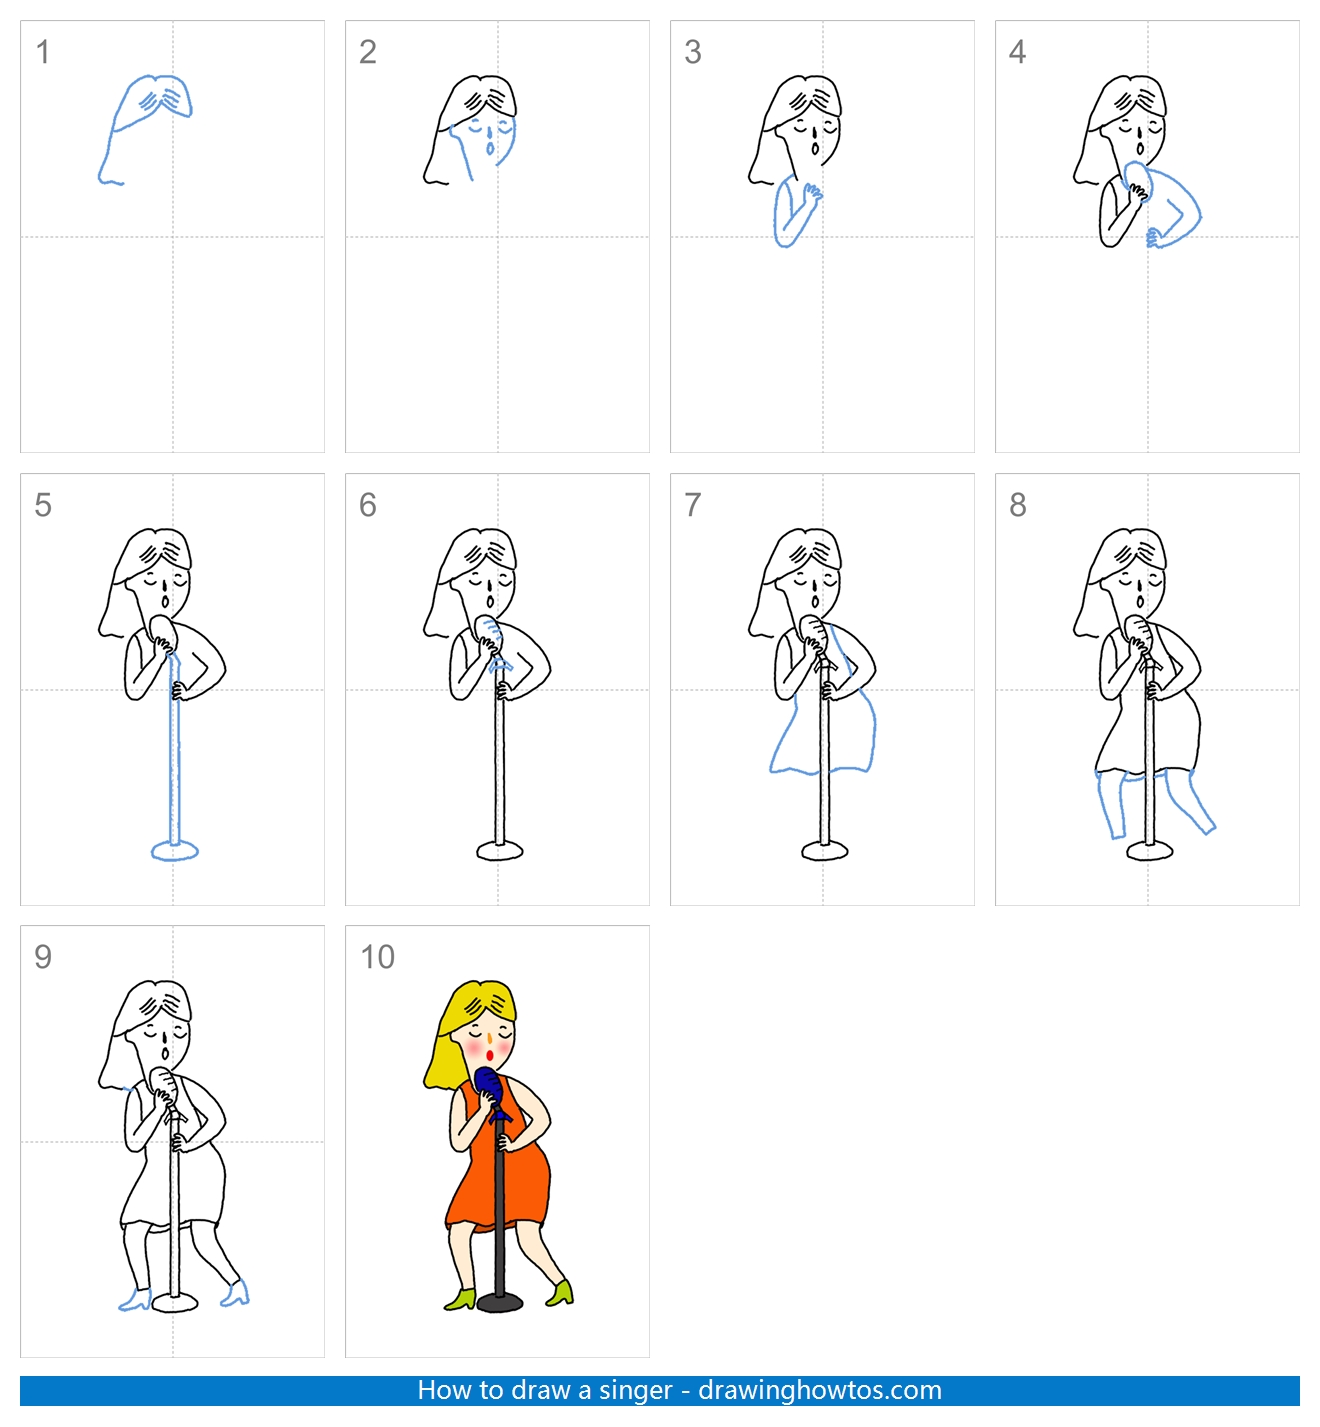 How to Draw a Singer Step by Step